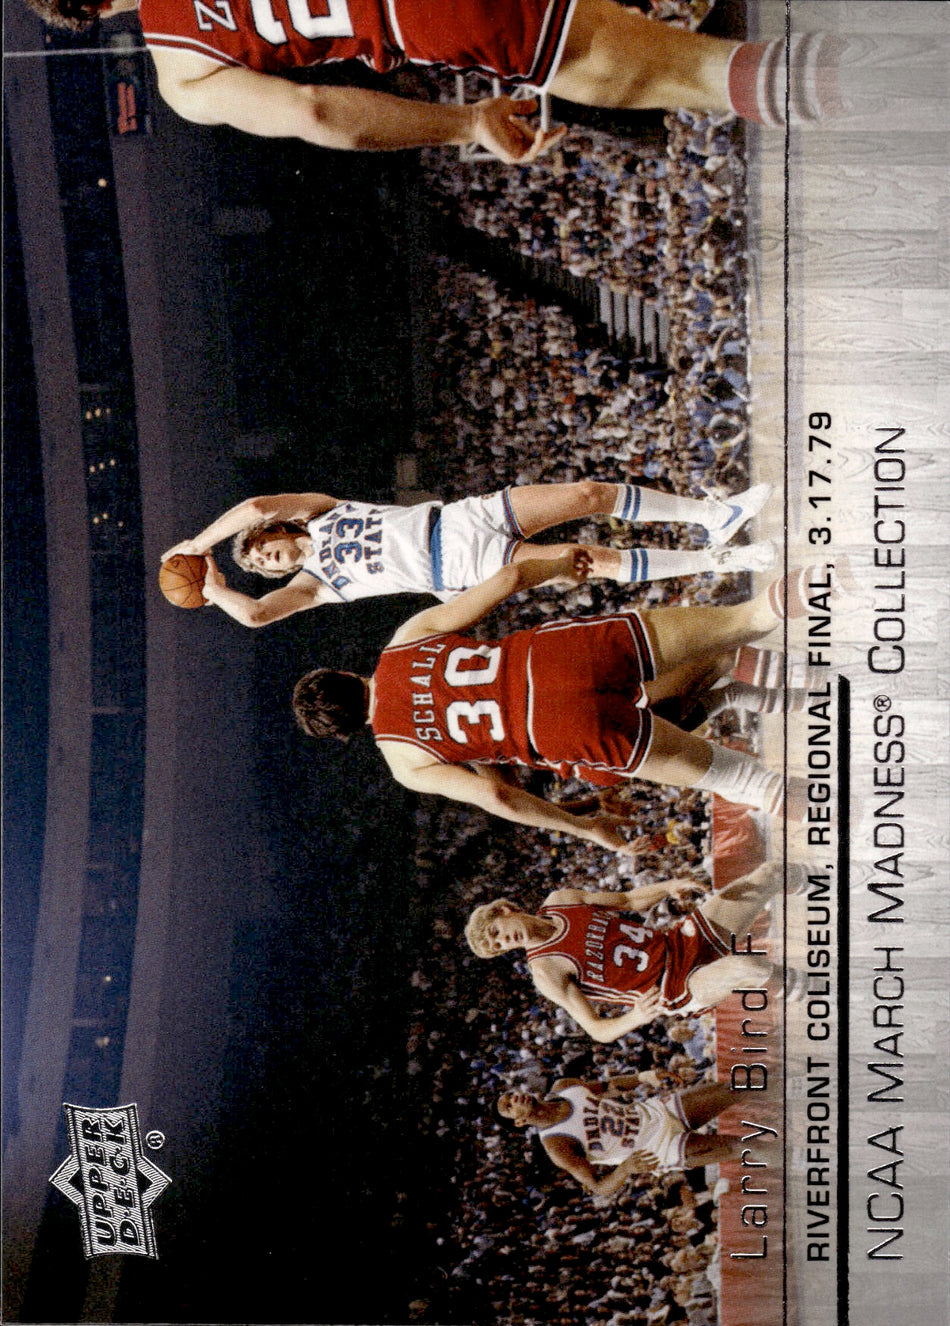 LARRY BIRD 2014 UPPER DECK MARCH MADNESS COLLECTION NO. LB-1